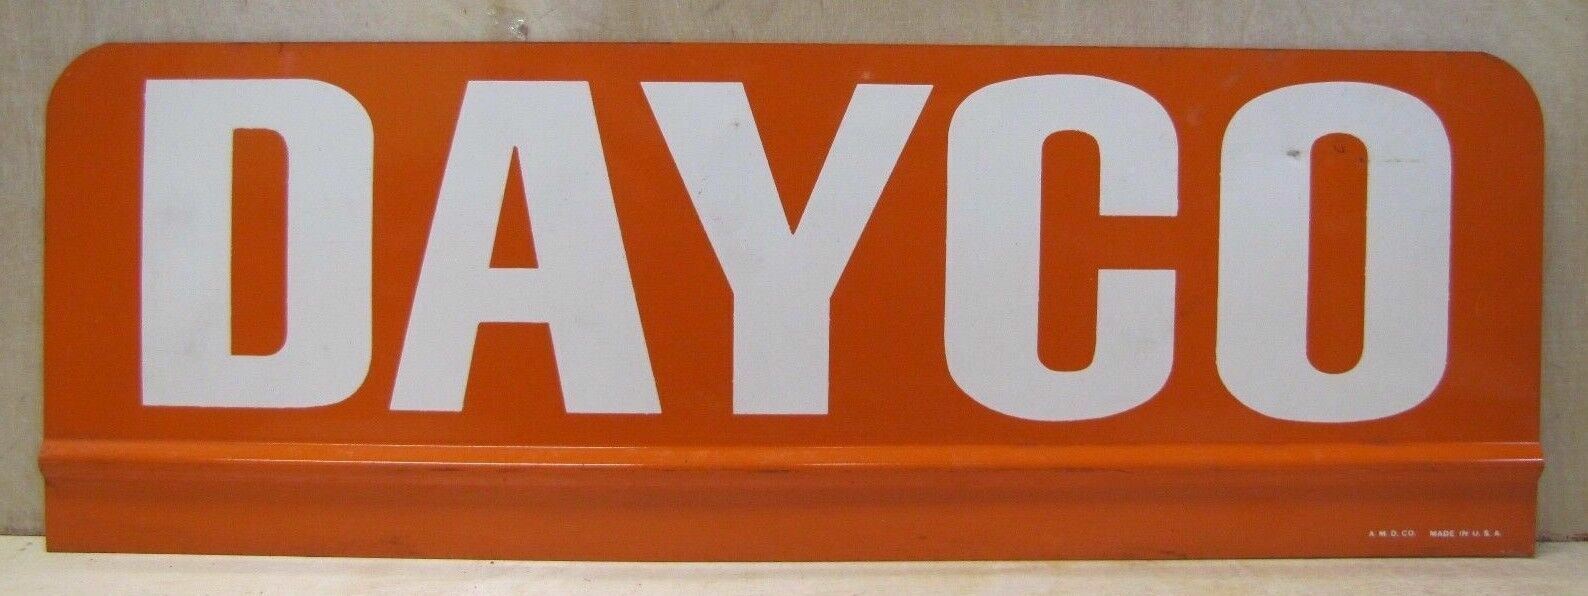 DAYCO Vintage Advertising Sign Auto Parts Store Belts Hoses Repair Shop AMD USA